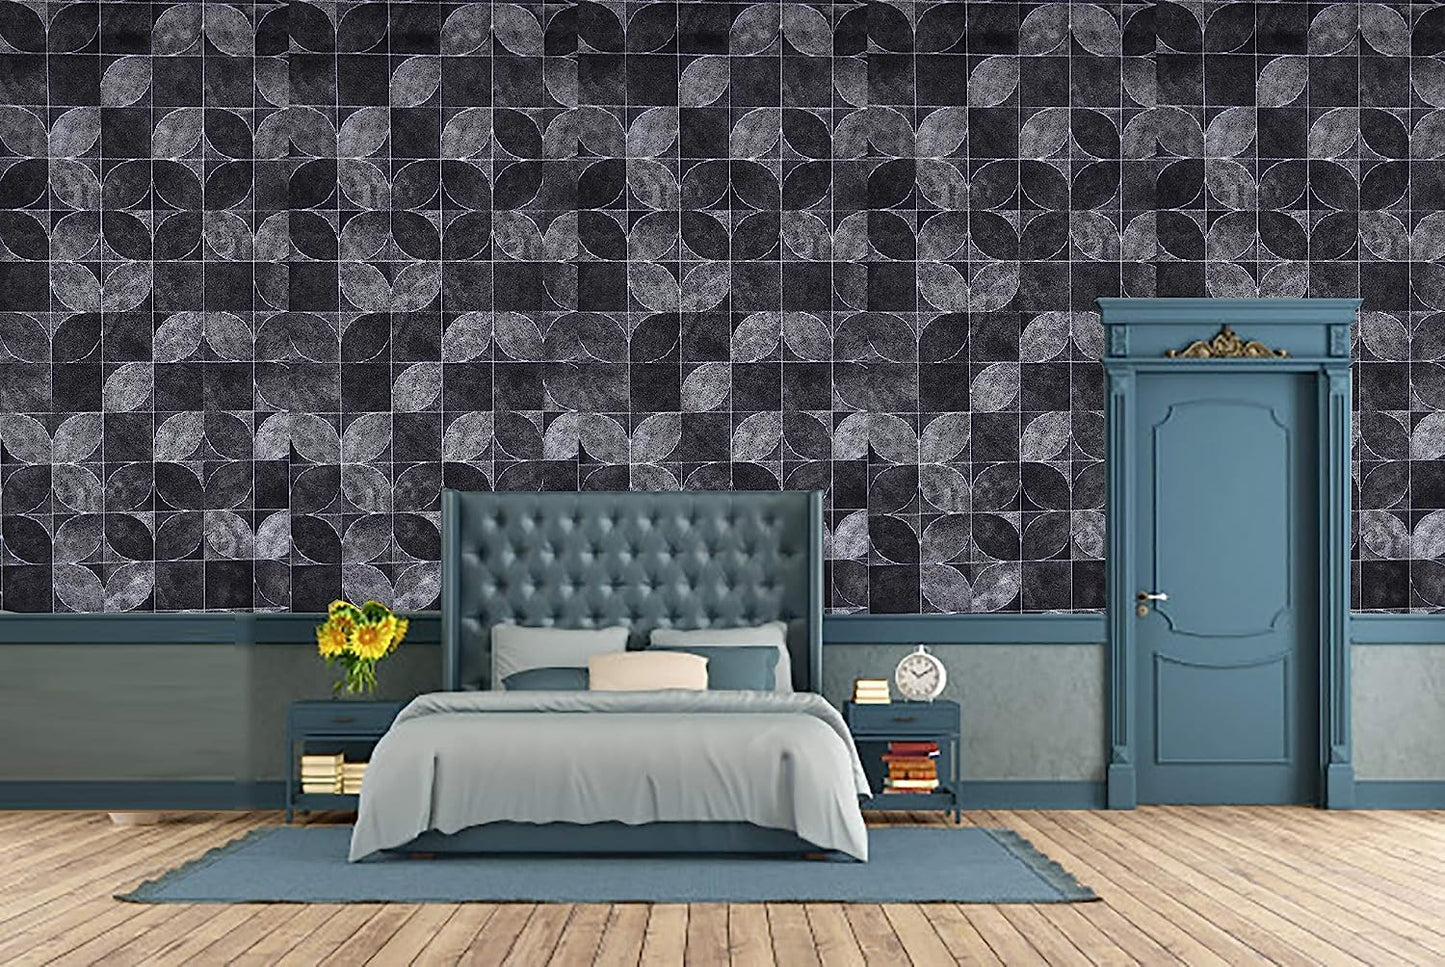 3D Latest American Leather Design Grey & Black Wallpaper Roll for Home Walls 57 Sq Ft (0.53m  or 33 Feet)